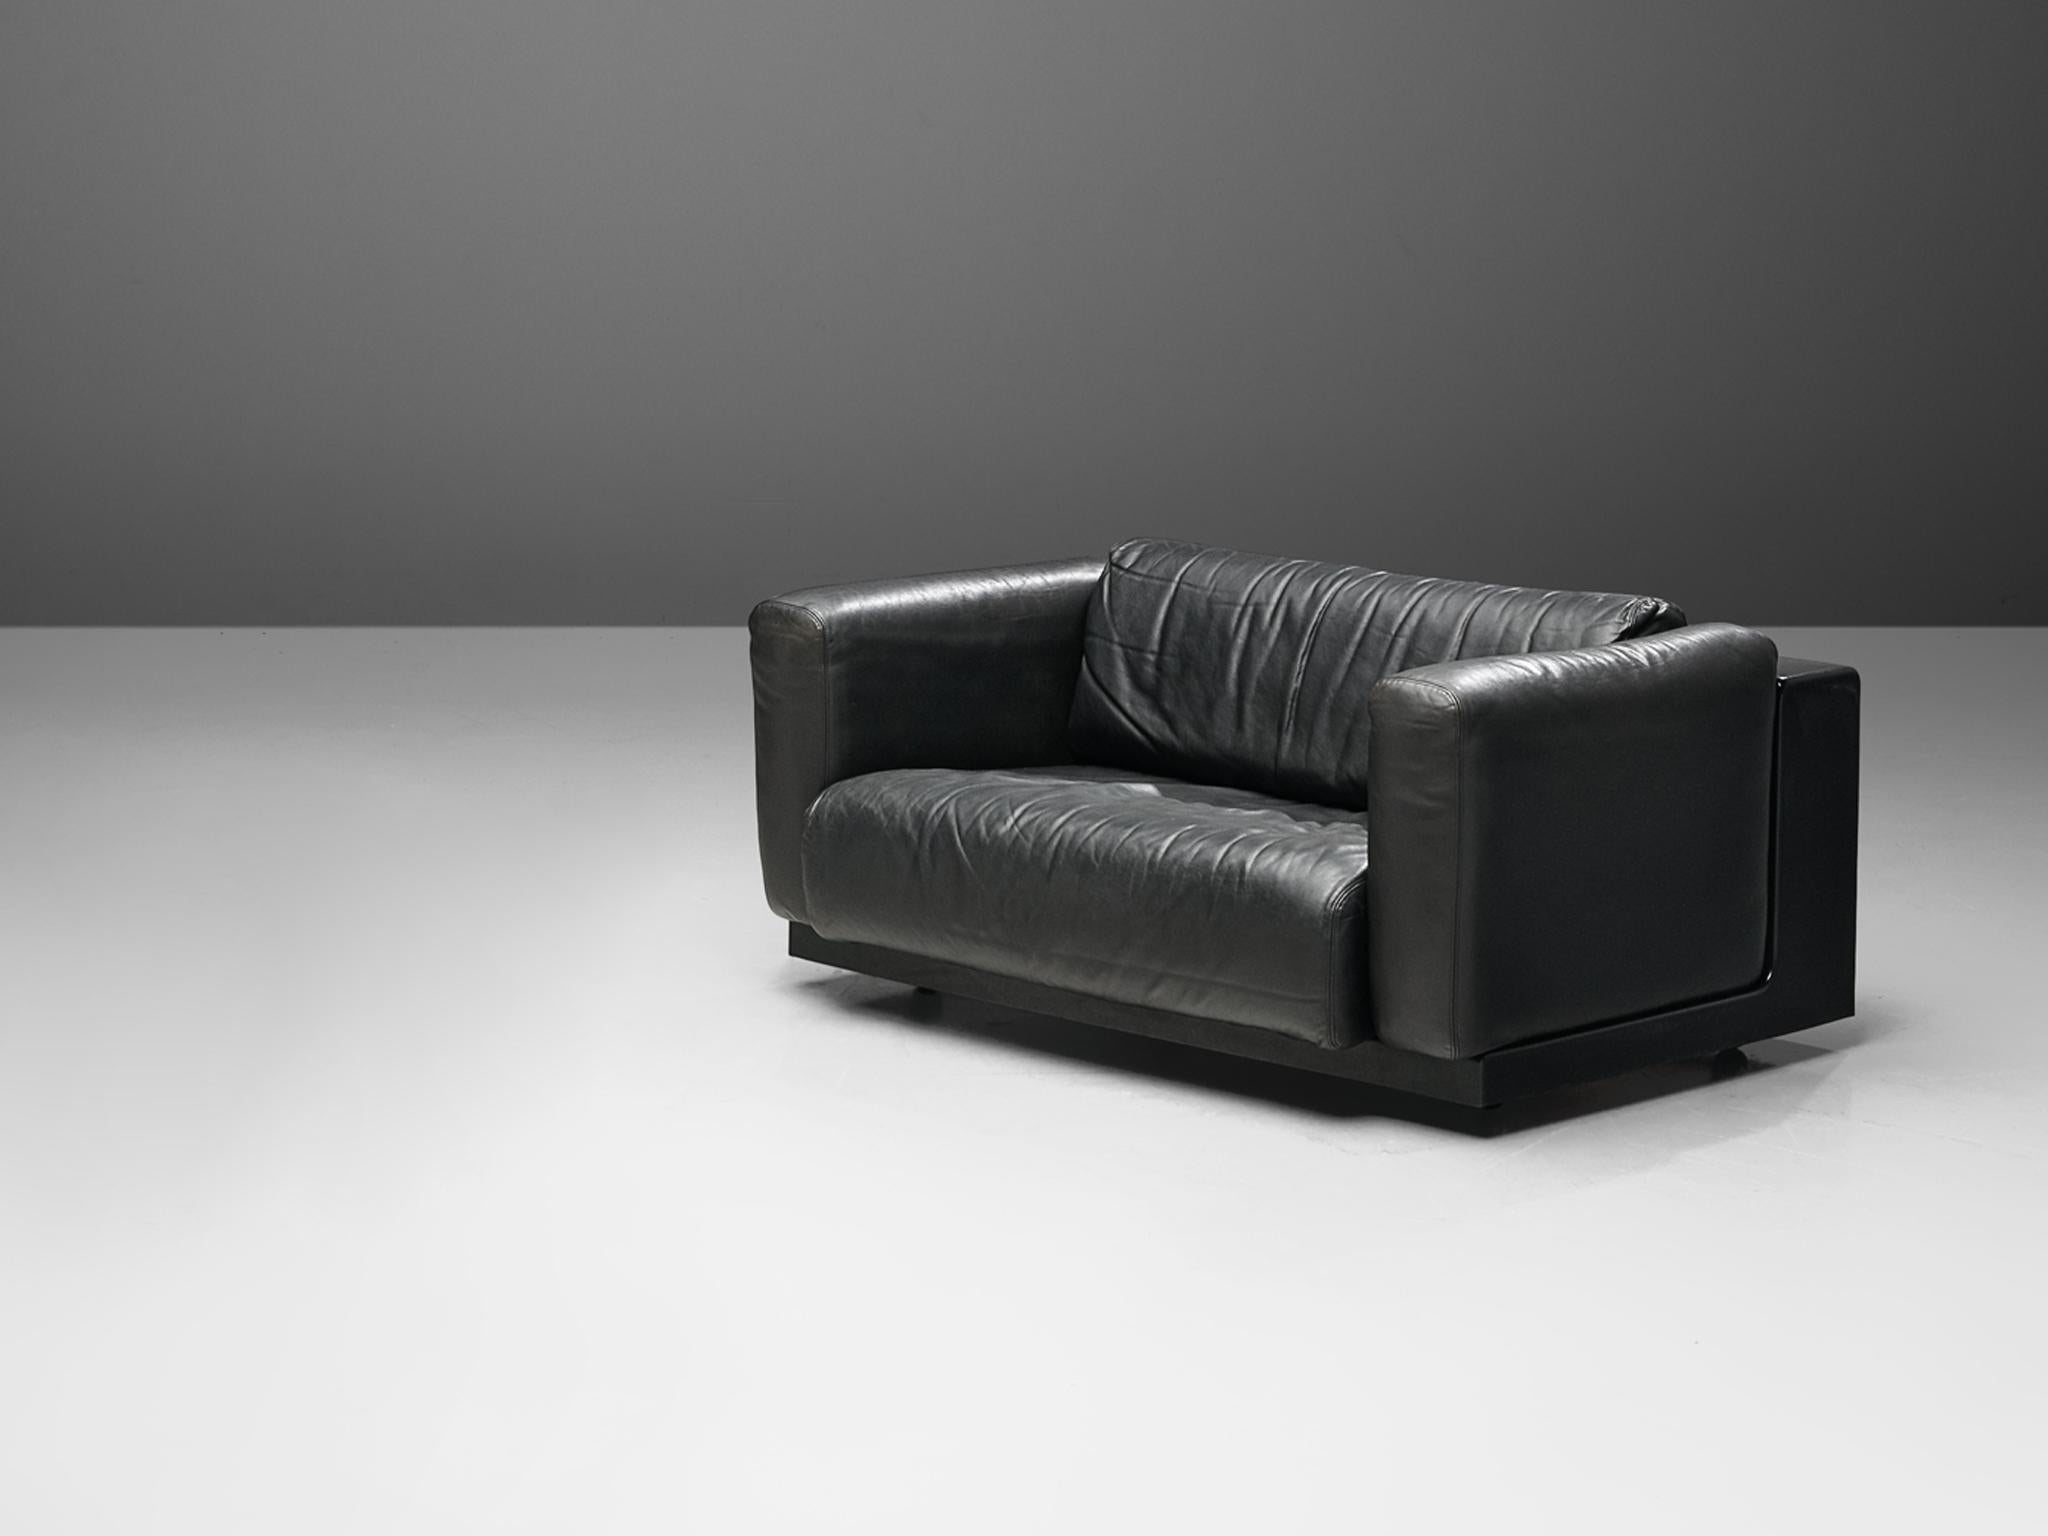 Cini Boeri for Knoll, pair of love seats, part of the 'Gradual' set, black leather, fiberglass, Italy, 1970s.

This pair of stunning black love seats was designed by Cini Boeri for Knoll and is part of the 'Gradual' sectional sofa. The design is